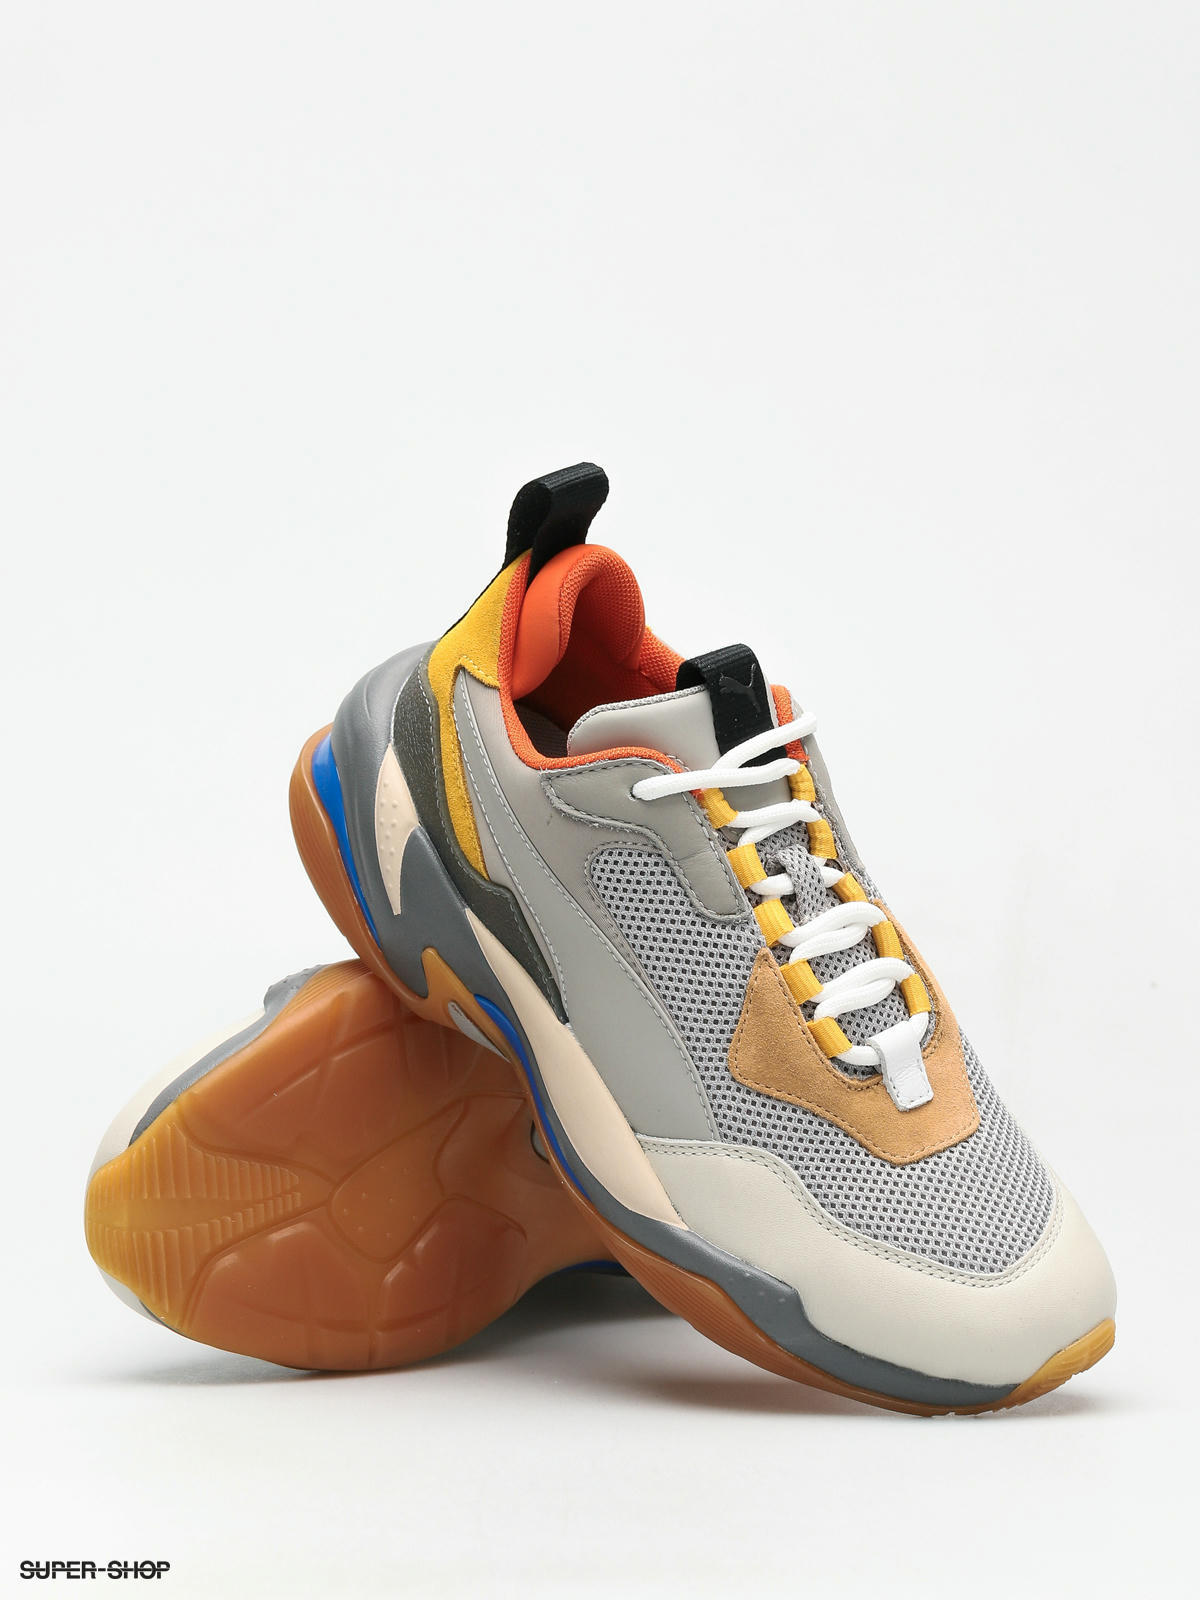 Shoes Thunder Spectra (drizzle/drizzle/steel gr)